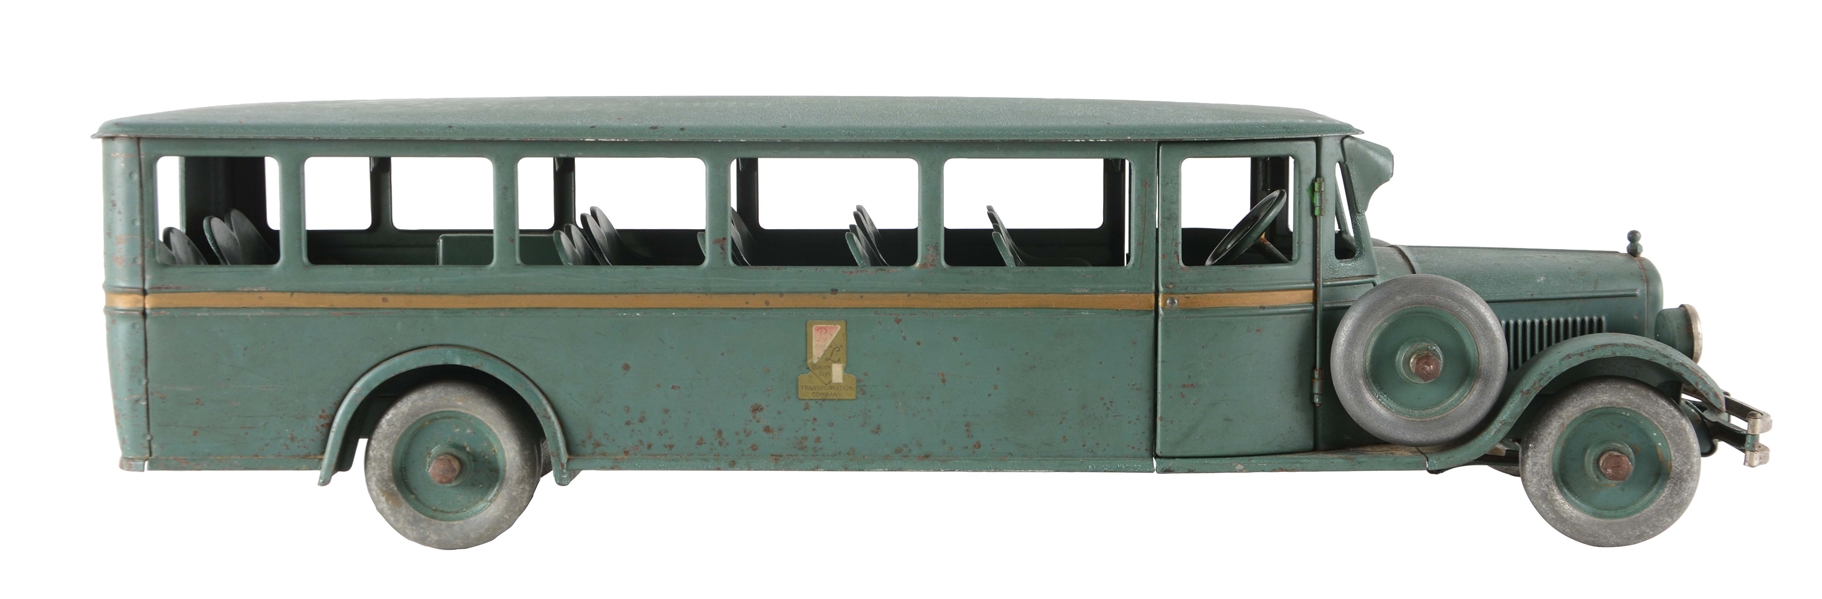 PRESSED STEEL BUDDY L TOURING BUS. 